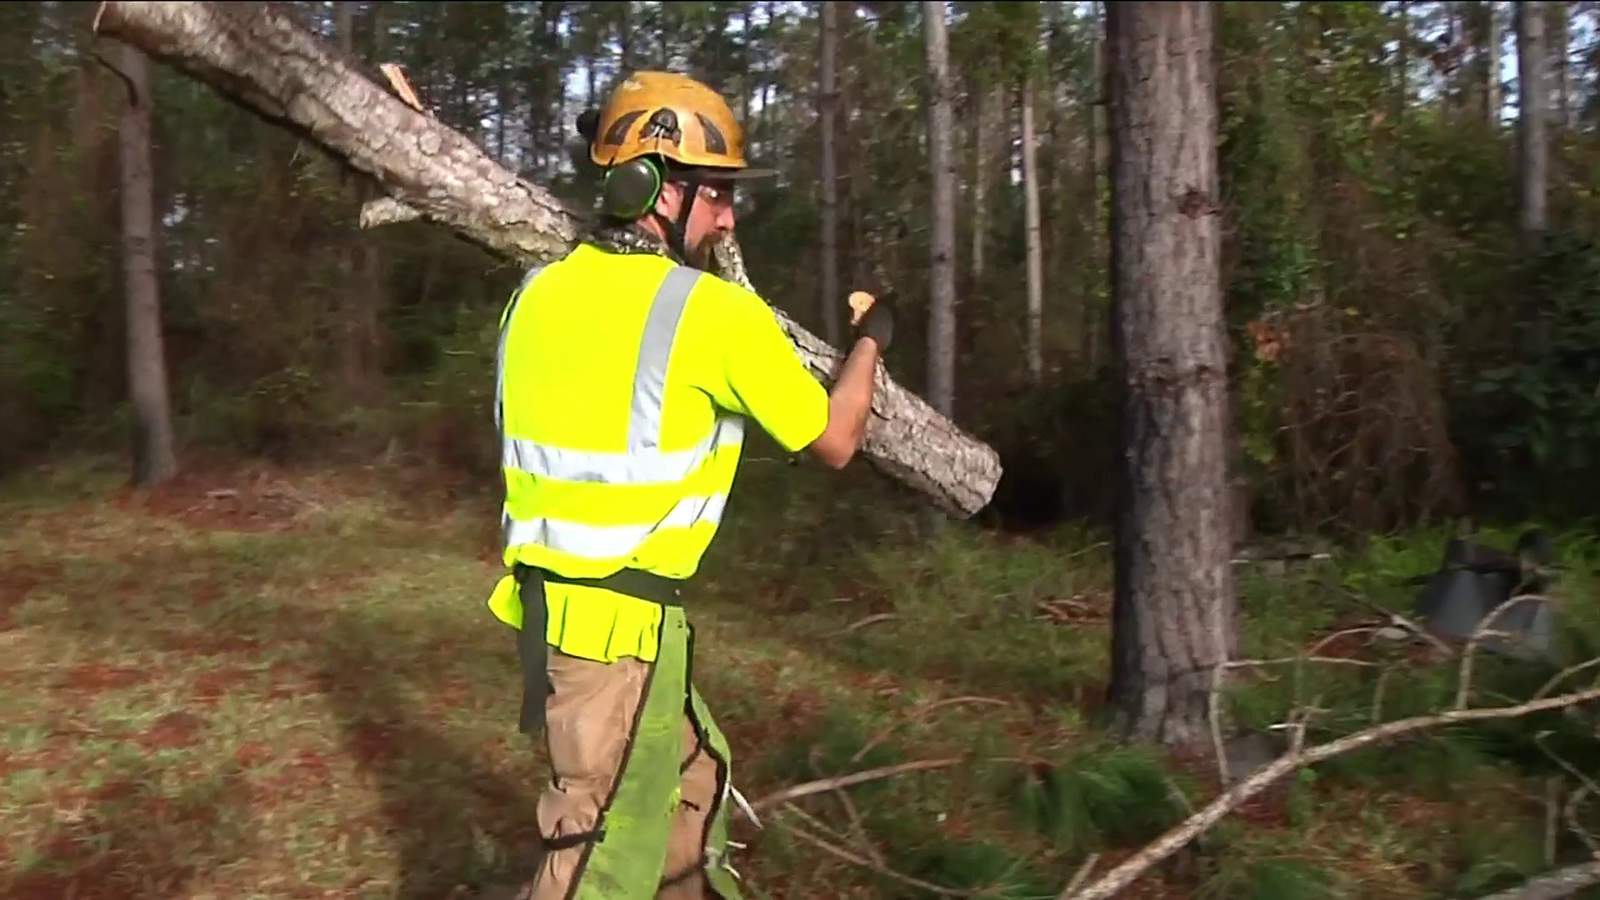 Tree removal service branches out to help veterans